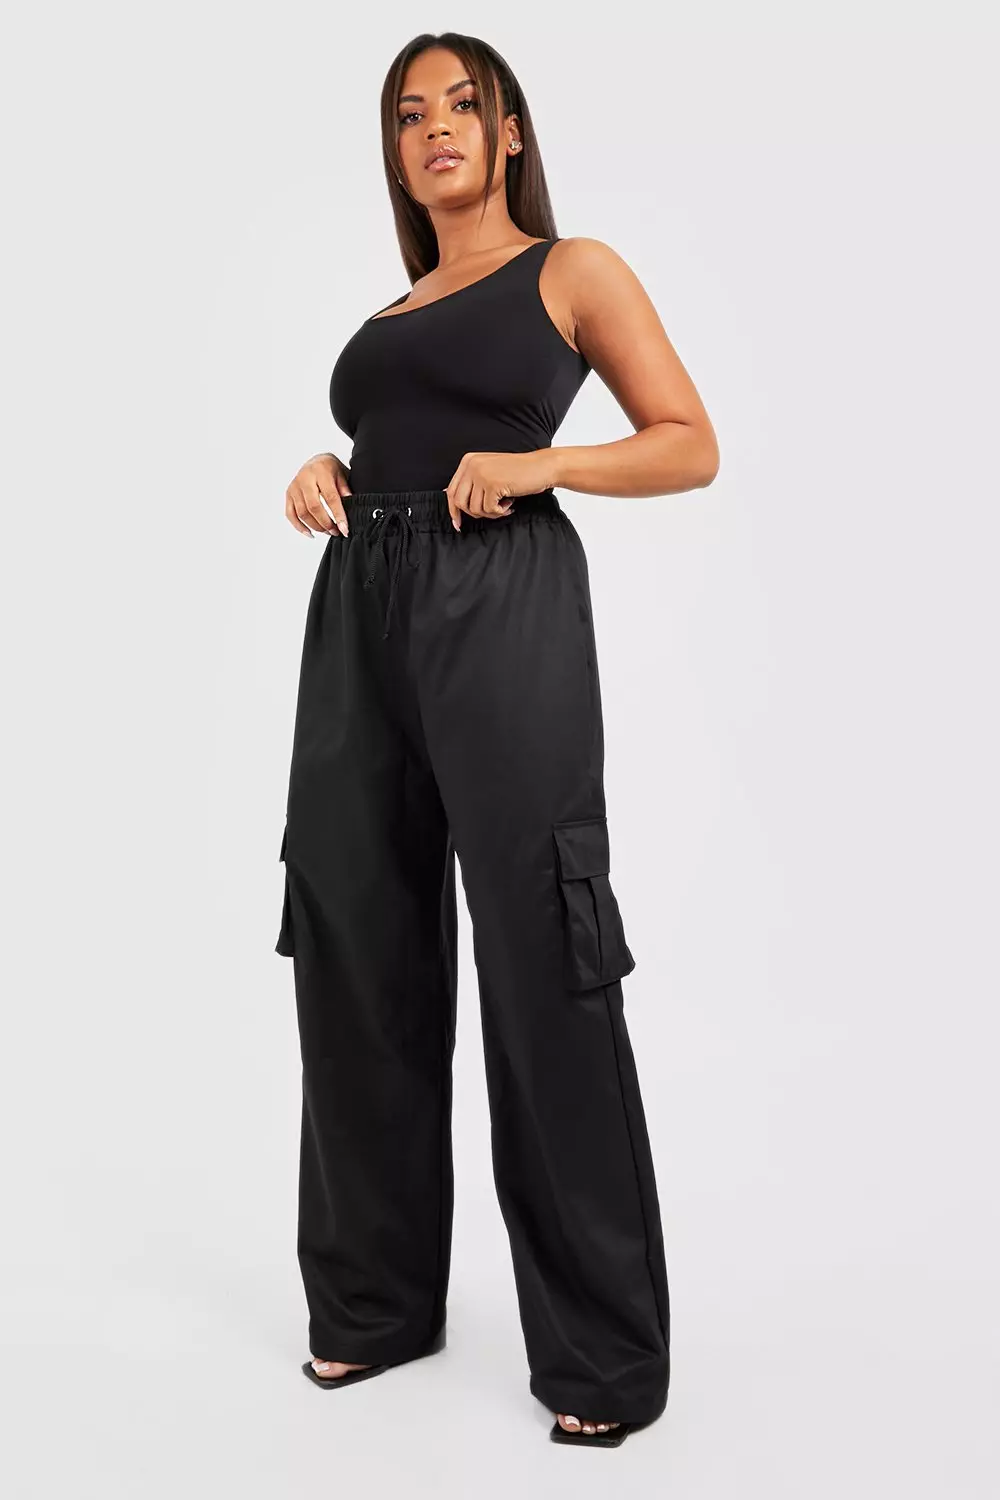 NKOOGH Black Pants Bodysuit Women Womens Cargo Pants With Pockets Women  Casual Solid Pants Wide Leg High Elastic Waist Palazzo Trousers Casual  Loose